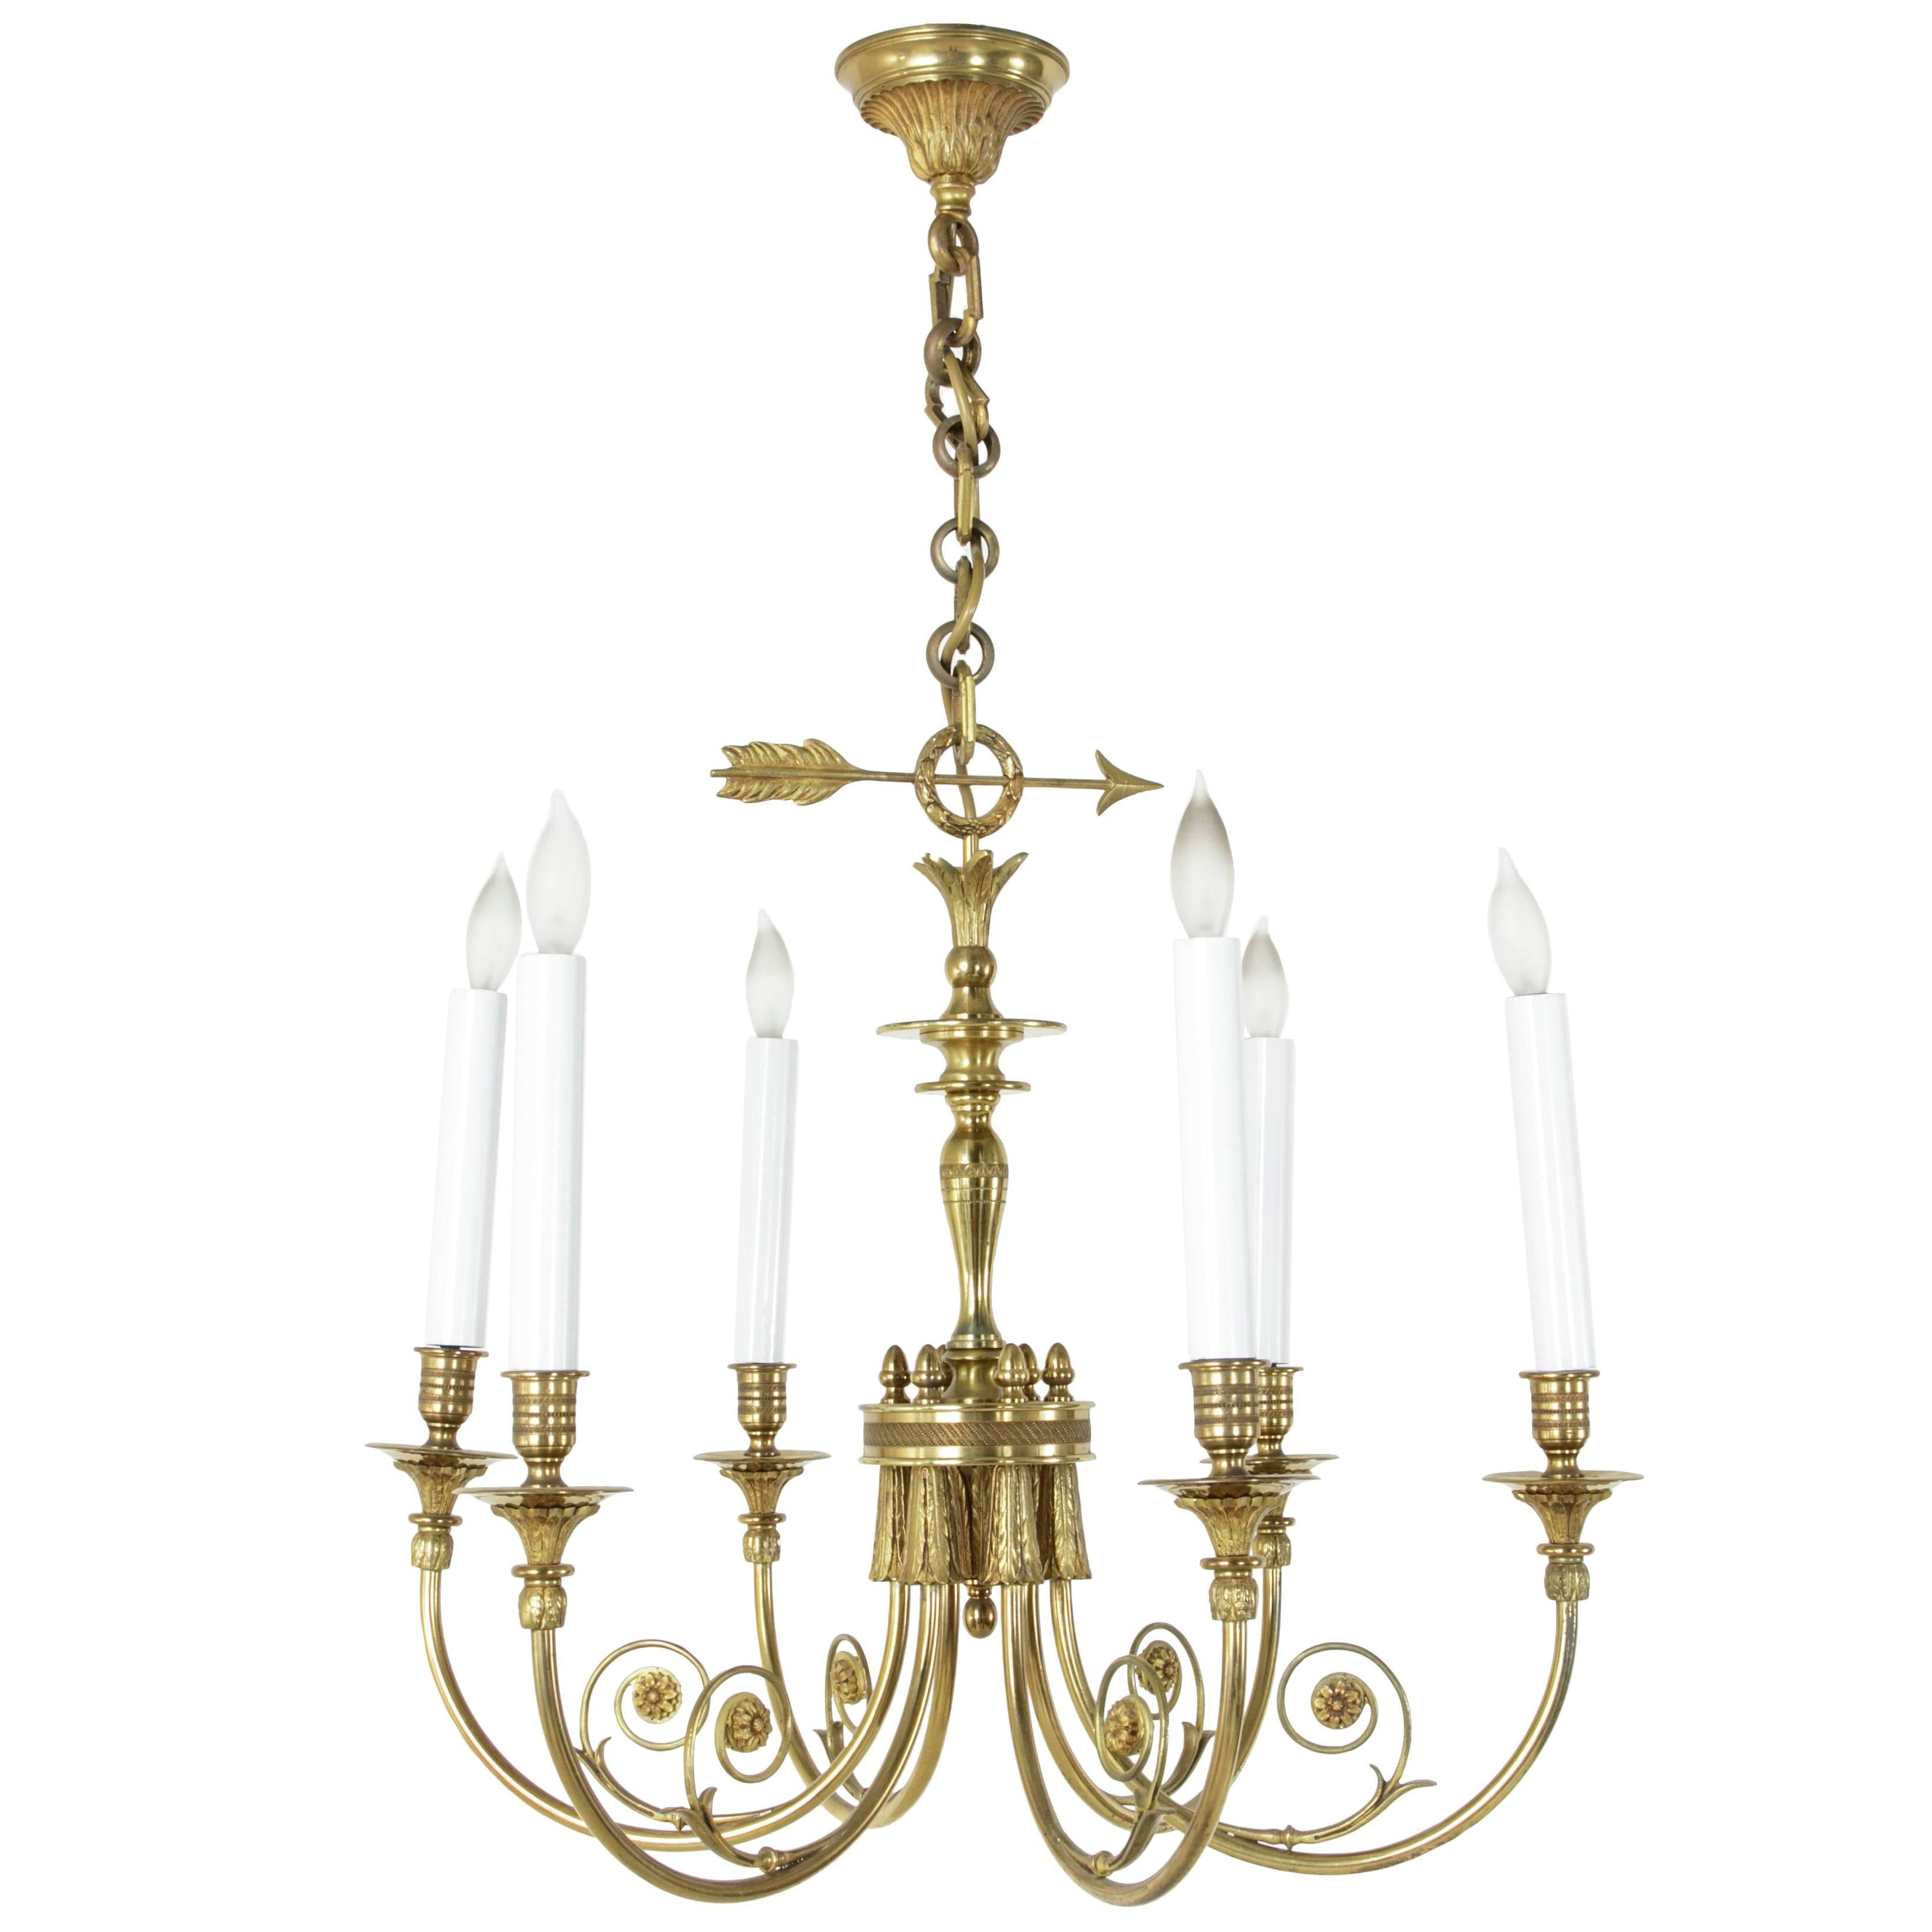 French Directoire Style Bronze Chandelier with Arrow Motif and Six Lights